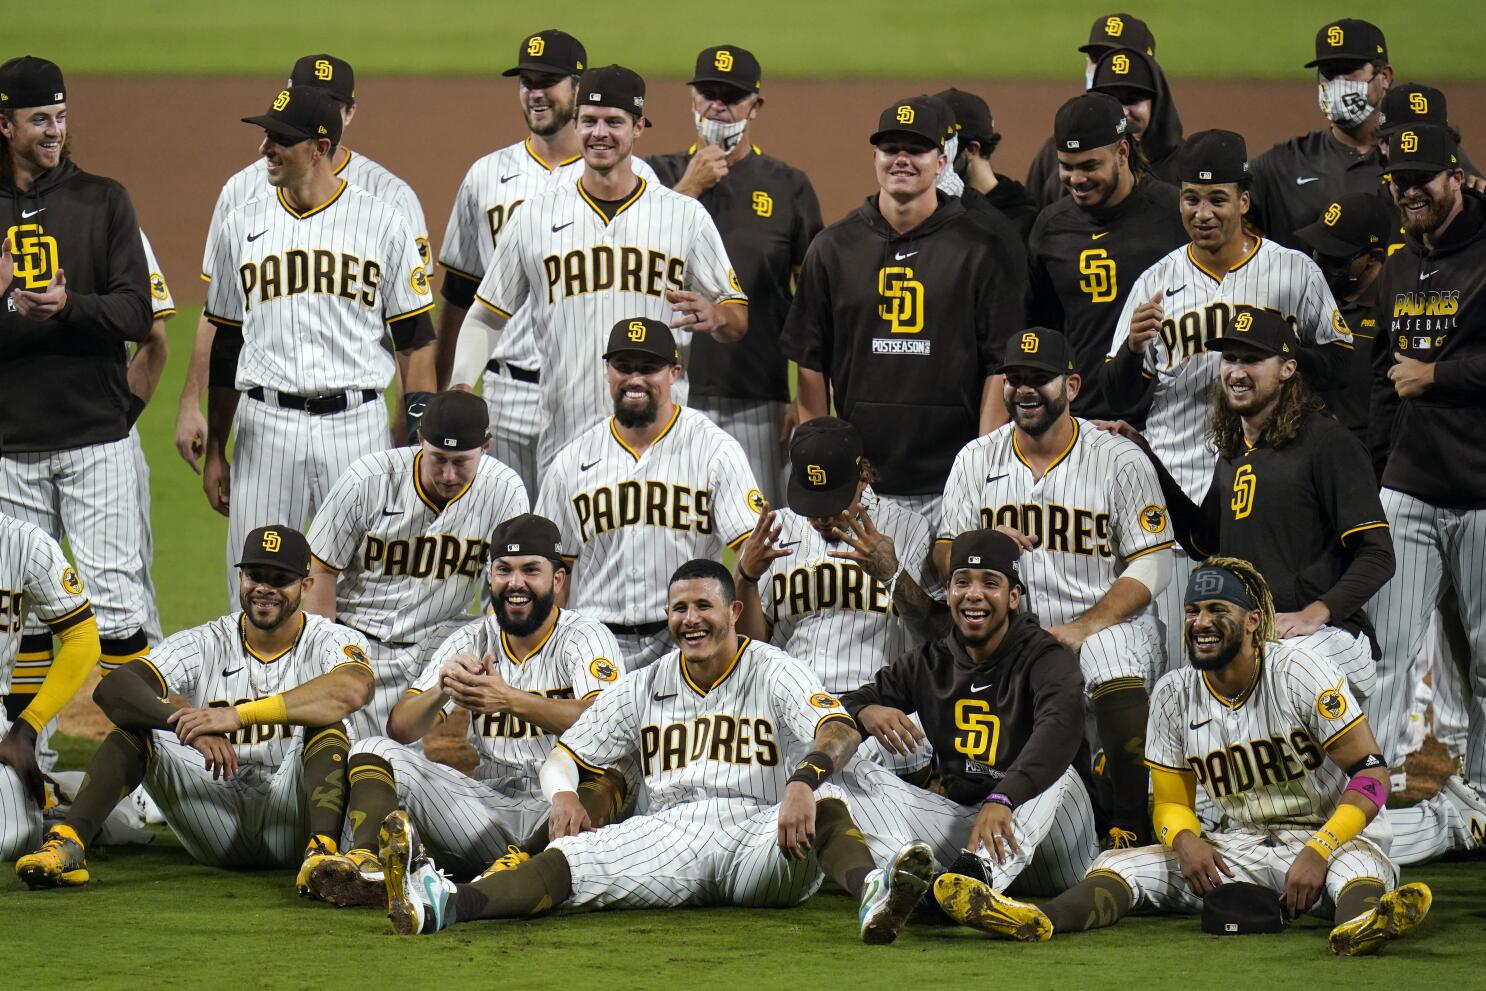 Padres wrap up 5th seed in NL playoffs, beating Giants 6-2